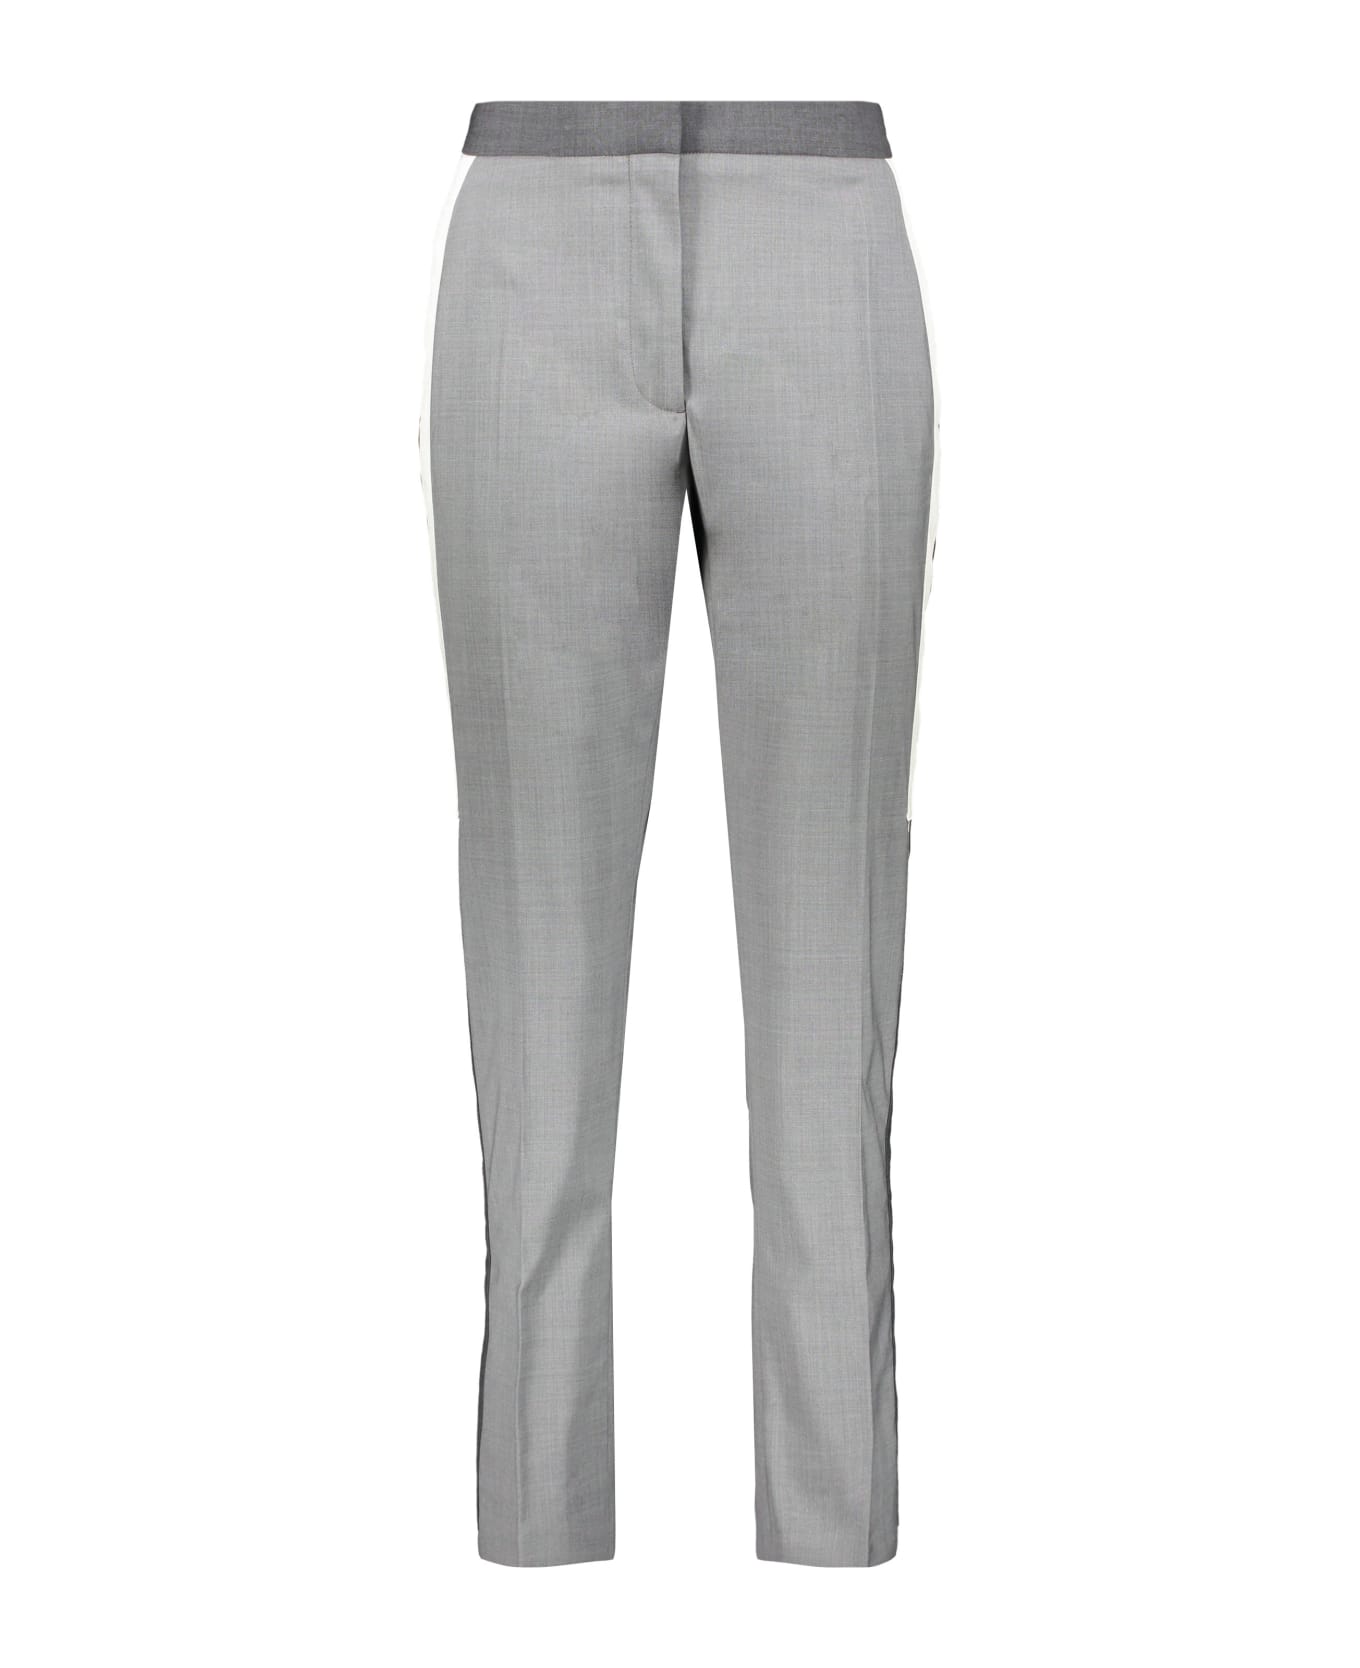 Burberry Wool Trousers - grey ボトムス